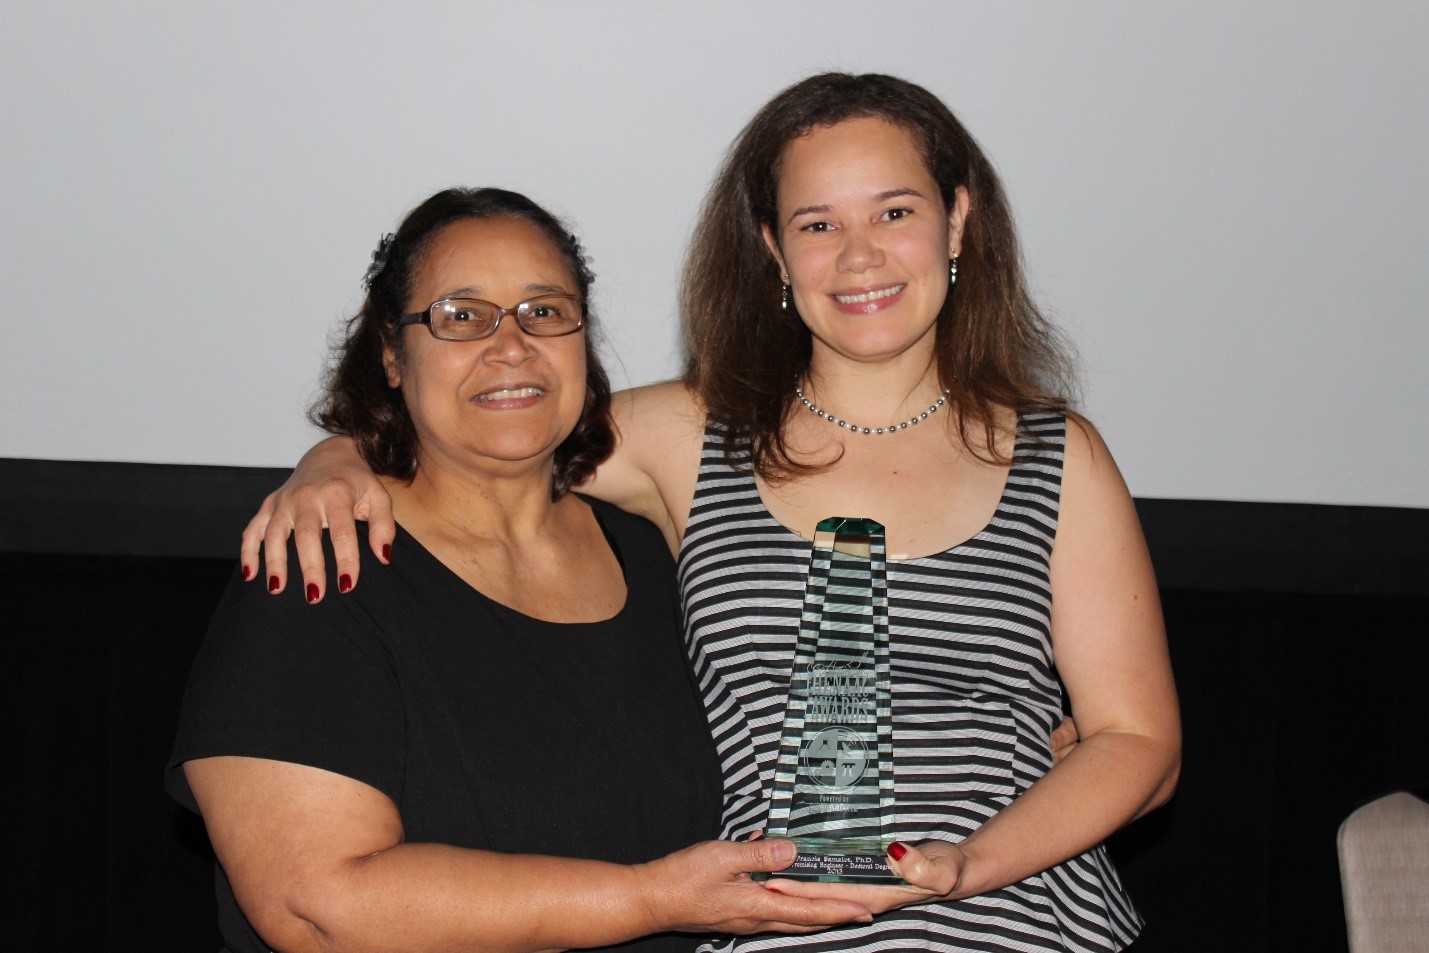 Francis photographed with her mom holding an award.